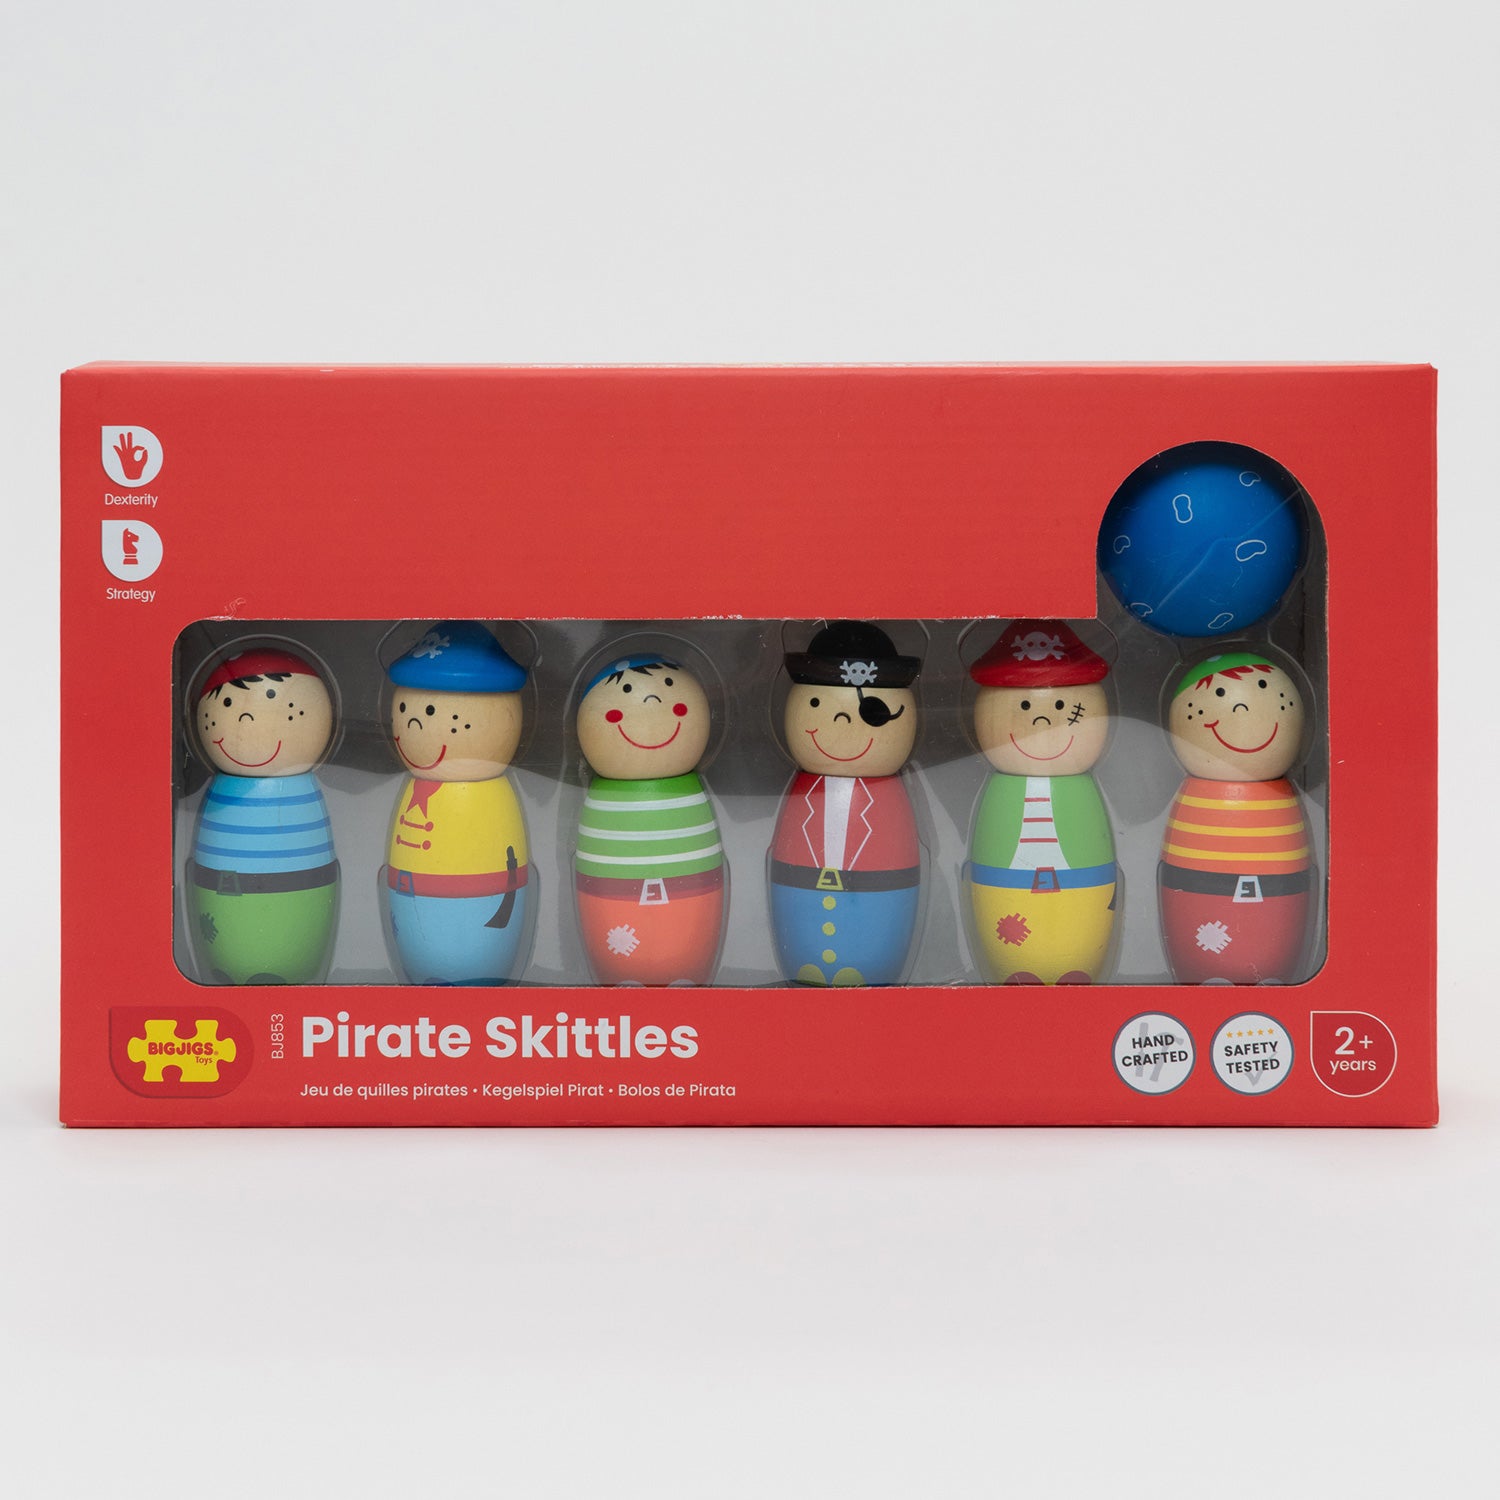 Wooden pirate skittles and ball in its packaging.